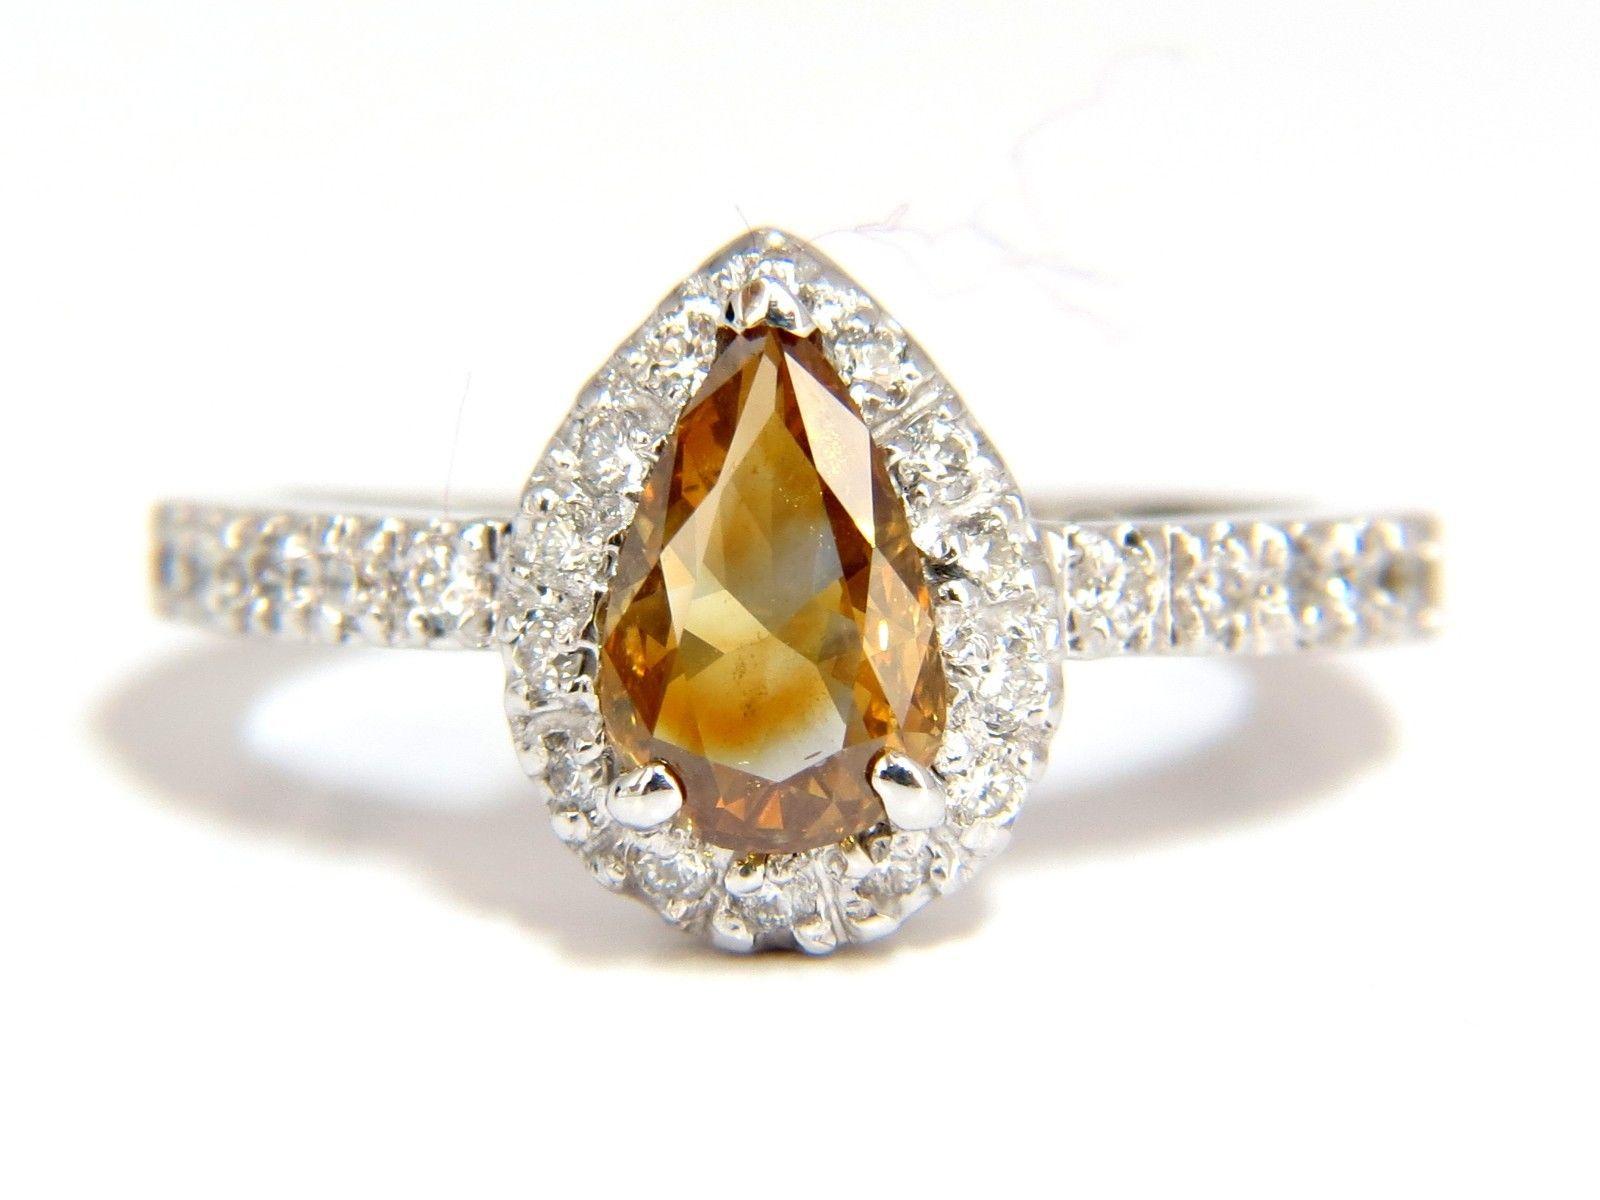 Sparkling Golden Yellow Browns Flash Fancy color Pear cut Diamond ring.

Natural Fancy color Center diamond: 1.10ct. 

Pear shape

5.2 X 7.9 mm

Si-1 clarity



.60ct. Side rounds diamonds:

G-color Vs-2 clarity.

14kt. white gold

4.4